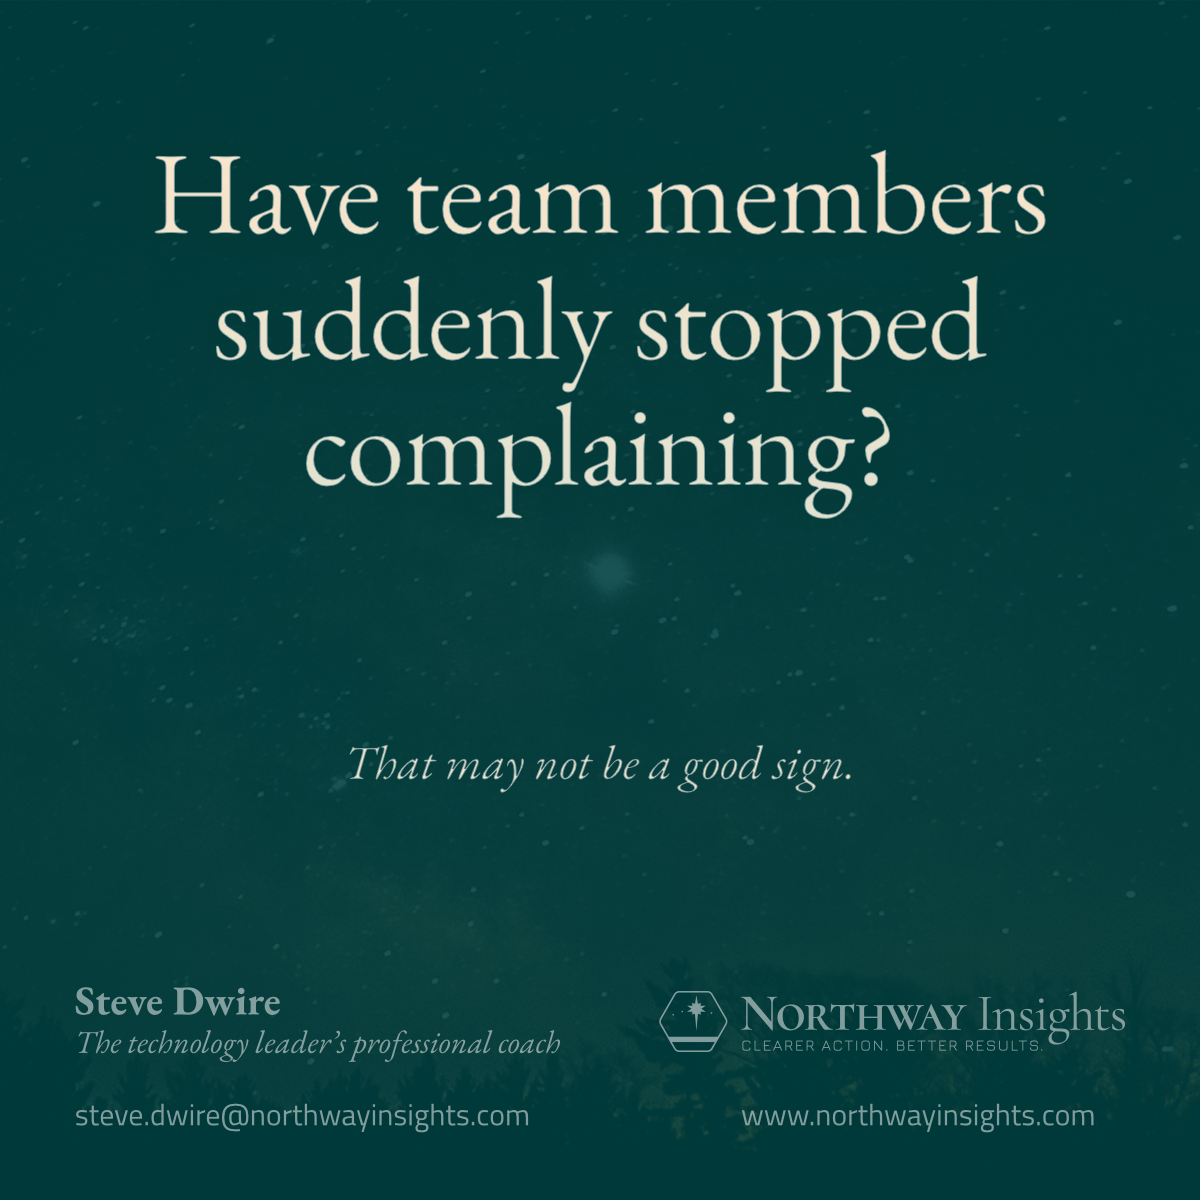 Have team members suddenly stopped complaining?